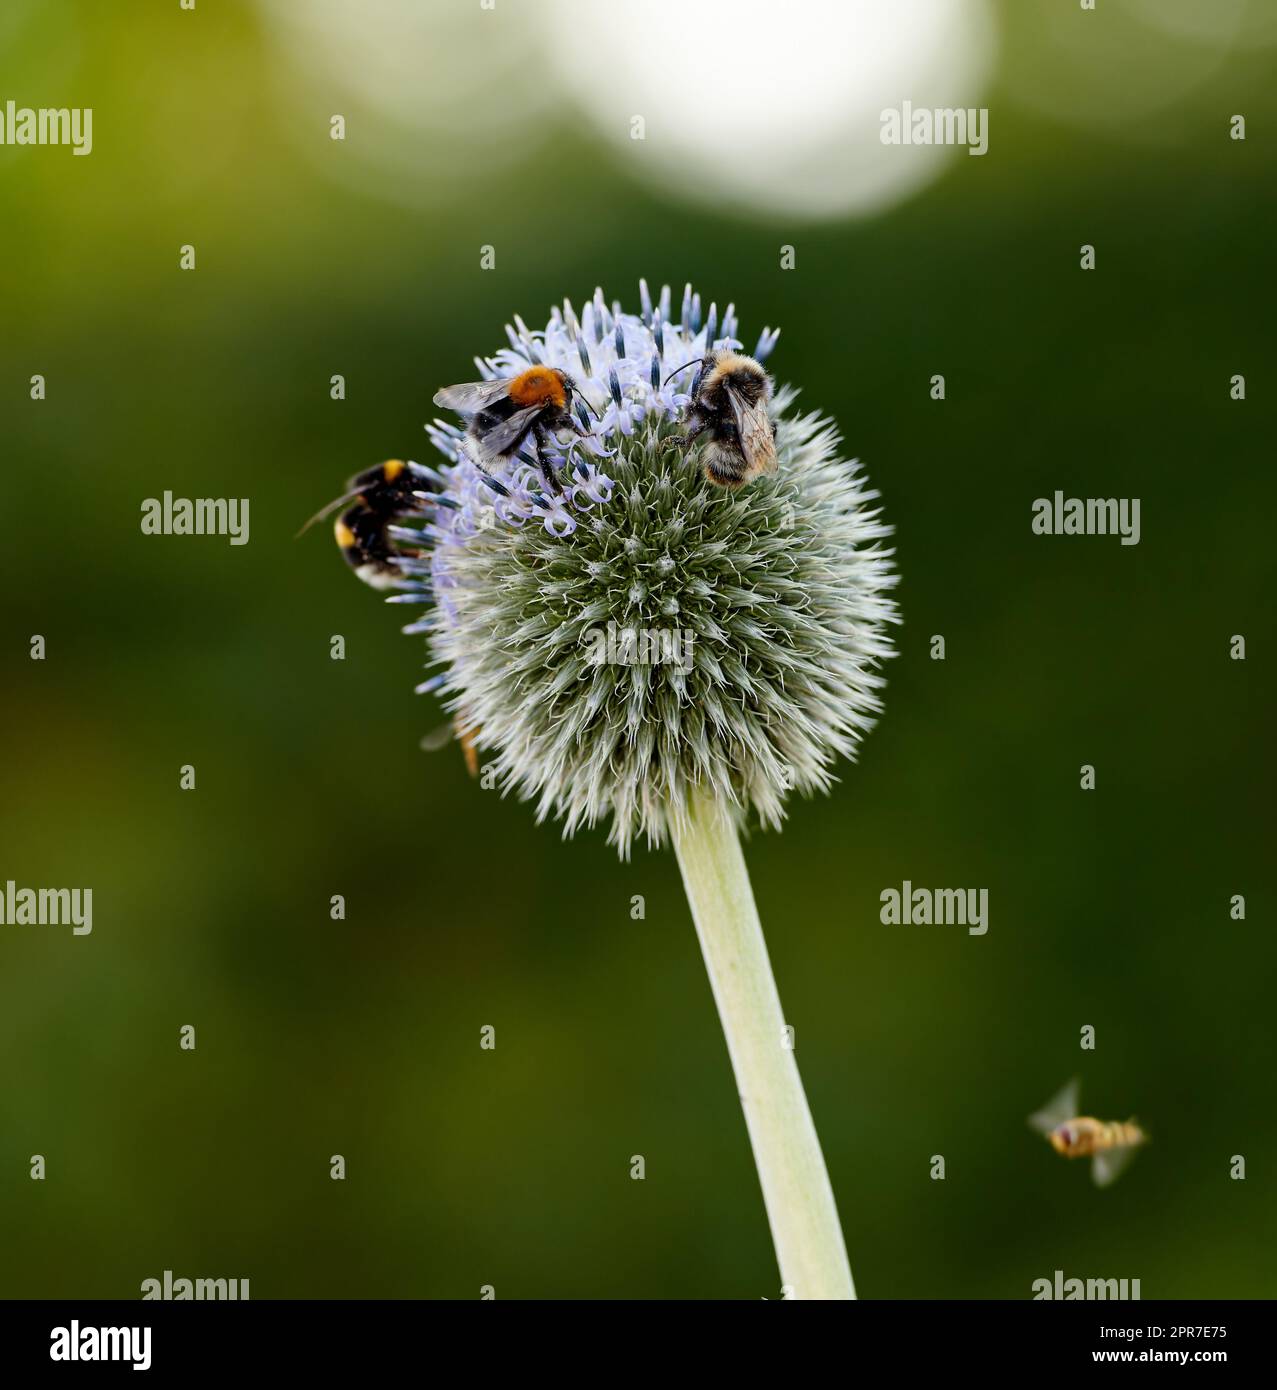 Closeup of globe thistle plants being pollinated by bees in a garden against a blurred nature background. Echinops flora growing on a green field in spring. Wildflowers blossoming in a meadow Stock Photo